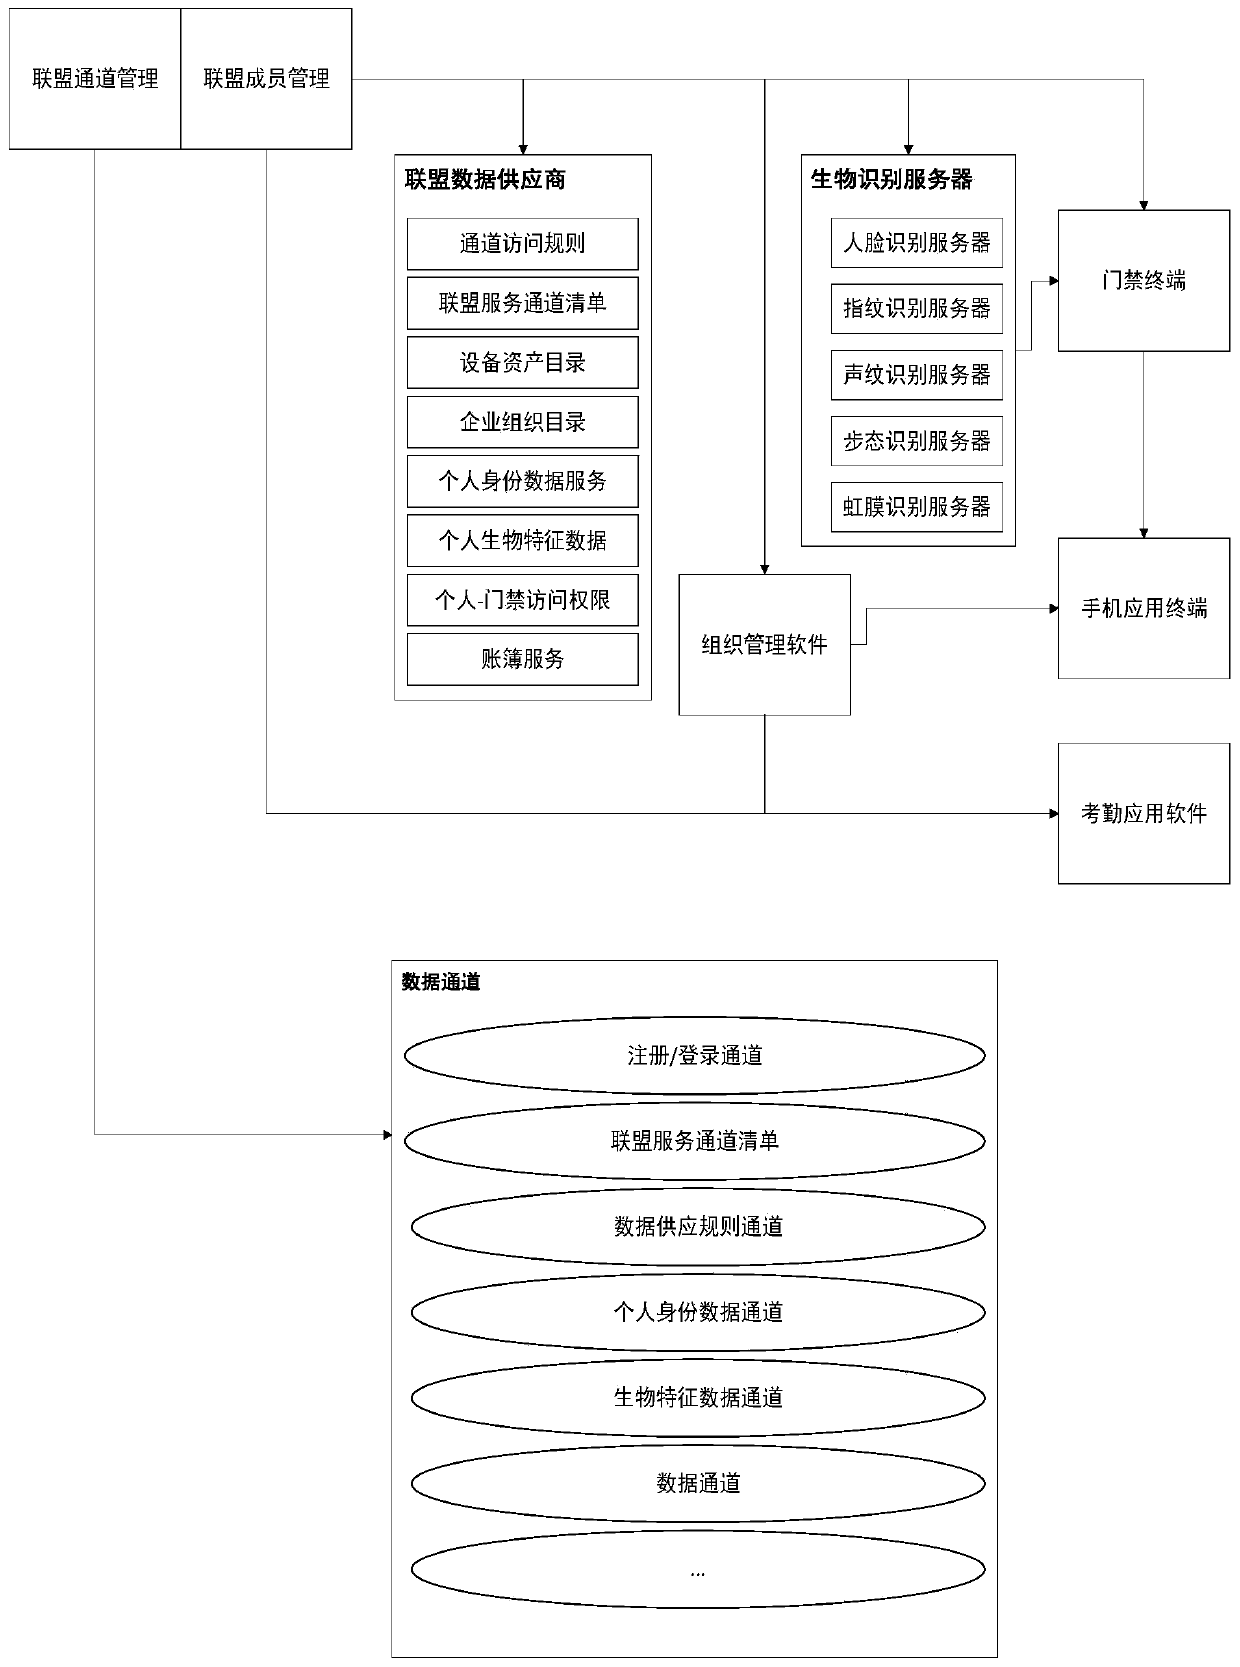 Access control identification system information node interconnection method based on blockchain architecture